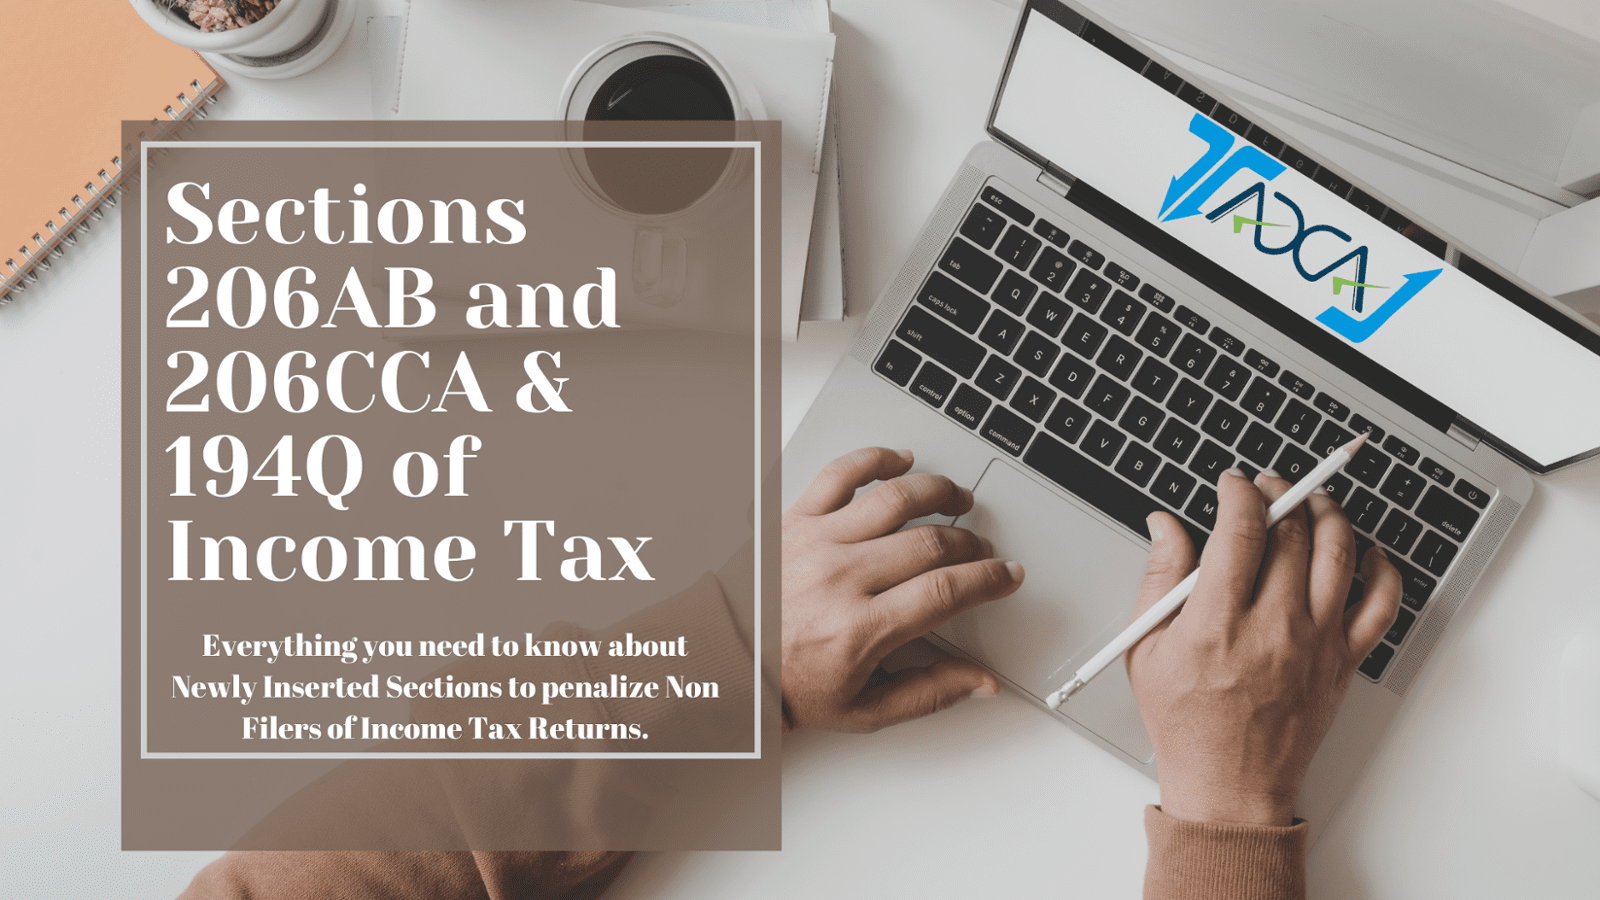 Sections 206AB and 206CCA & 194Q of Income Tax